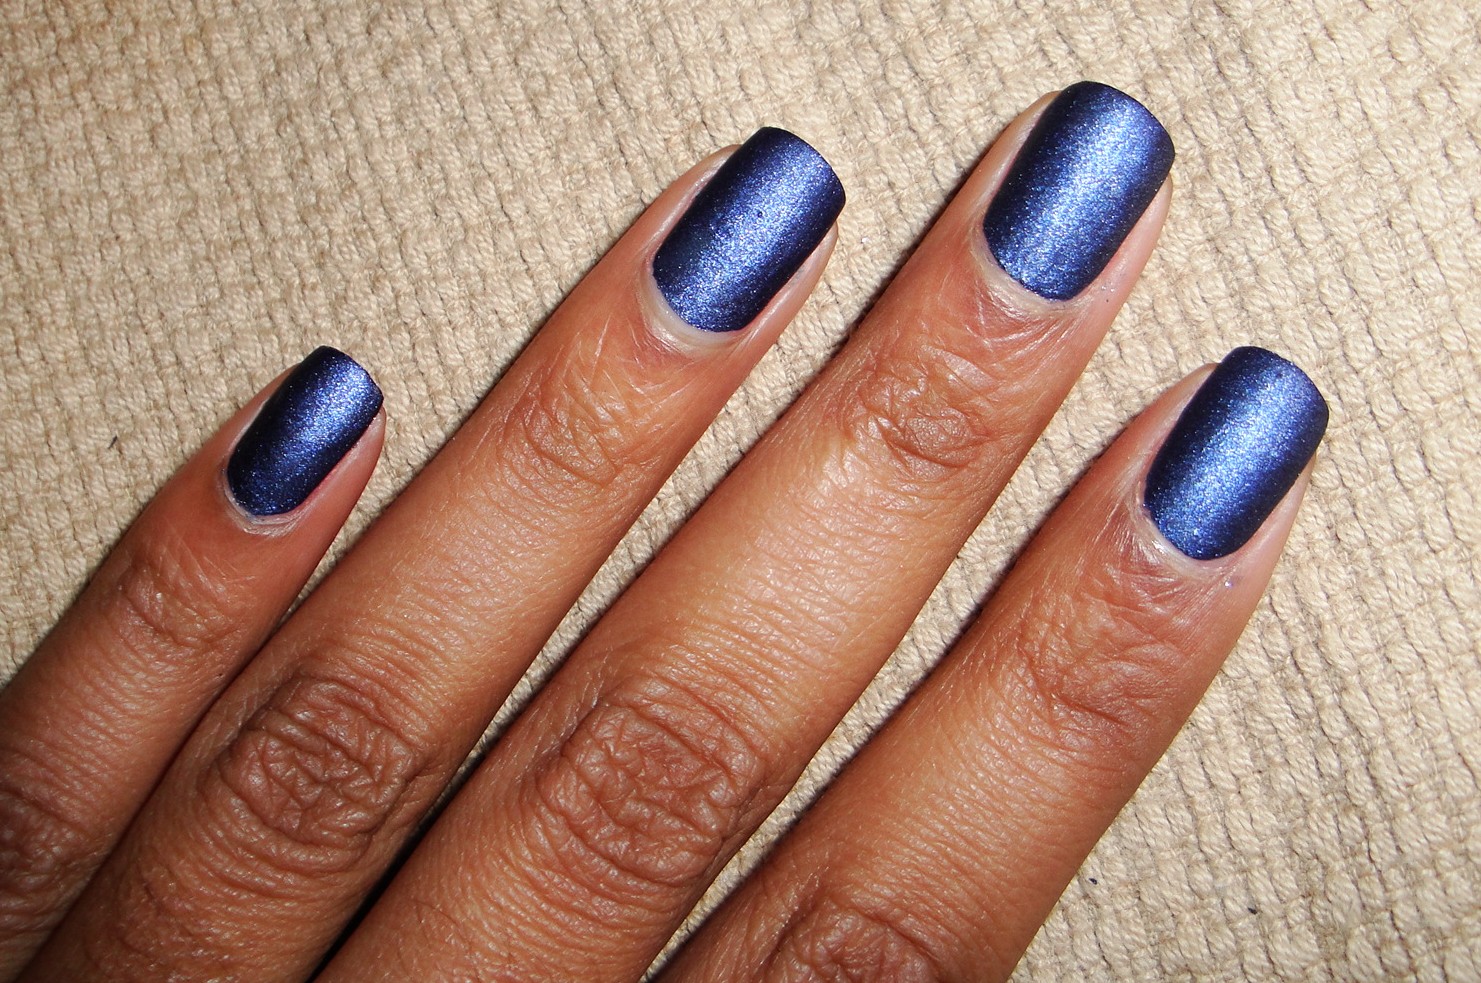 1. OPI Nail Lacquer in "Russian Navy" - wide 4